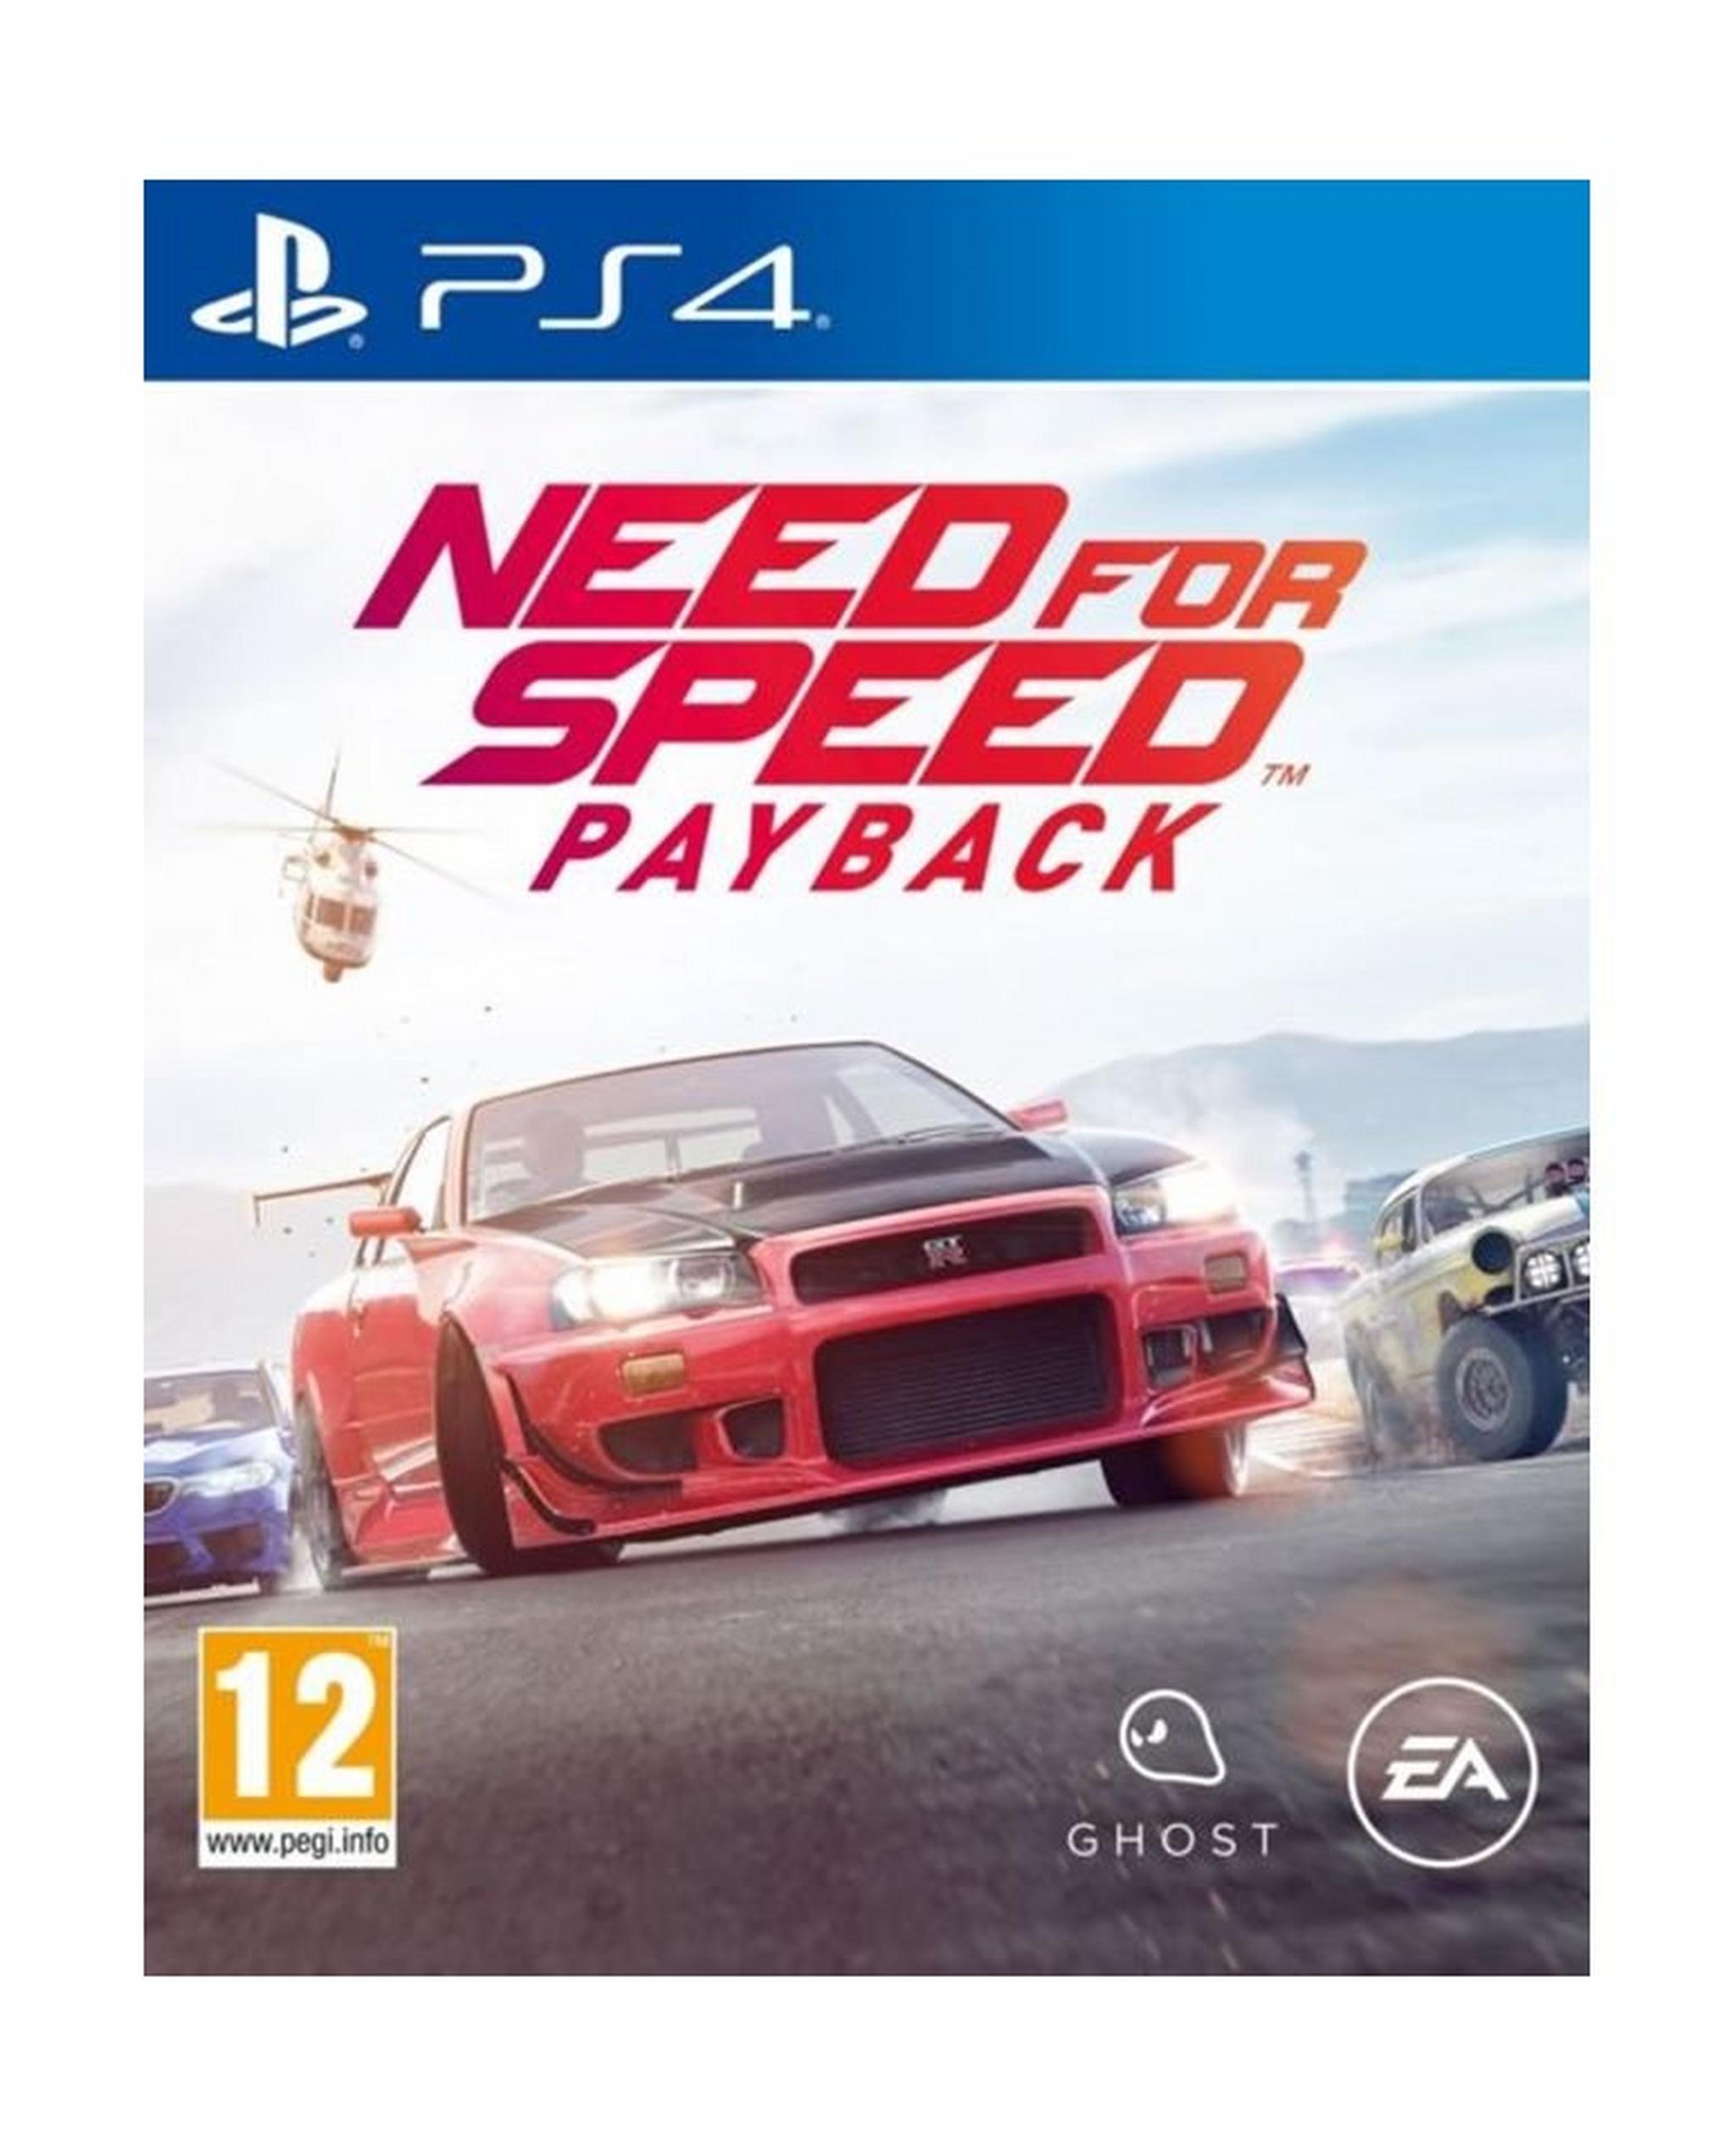 Need For Speed Payback: PlayStation 4 Game